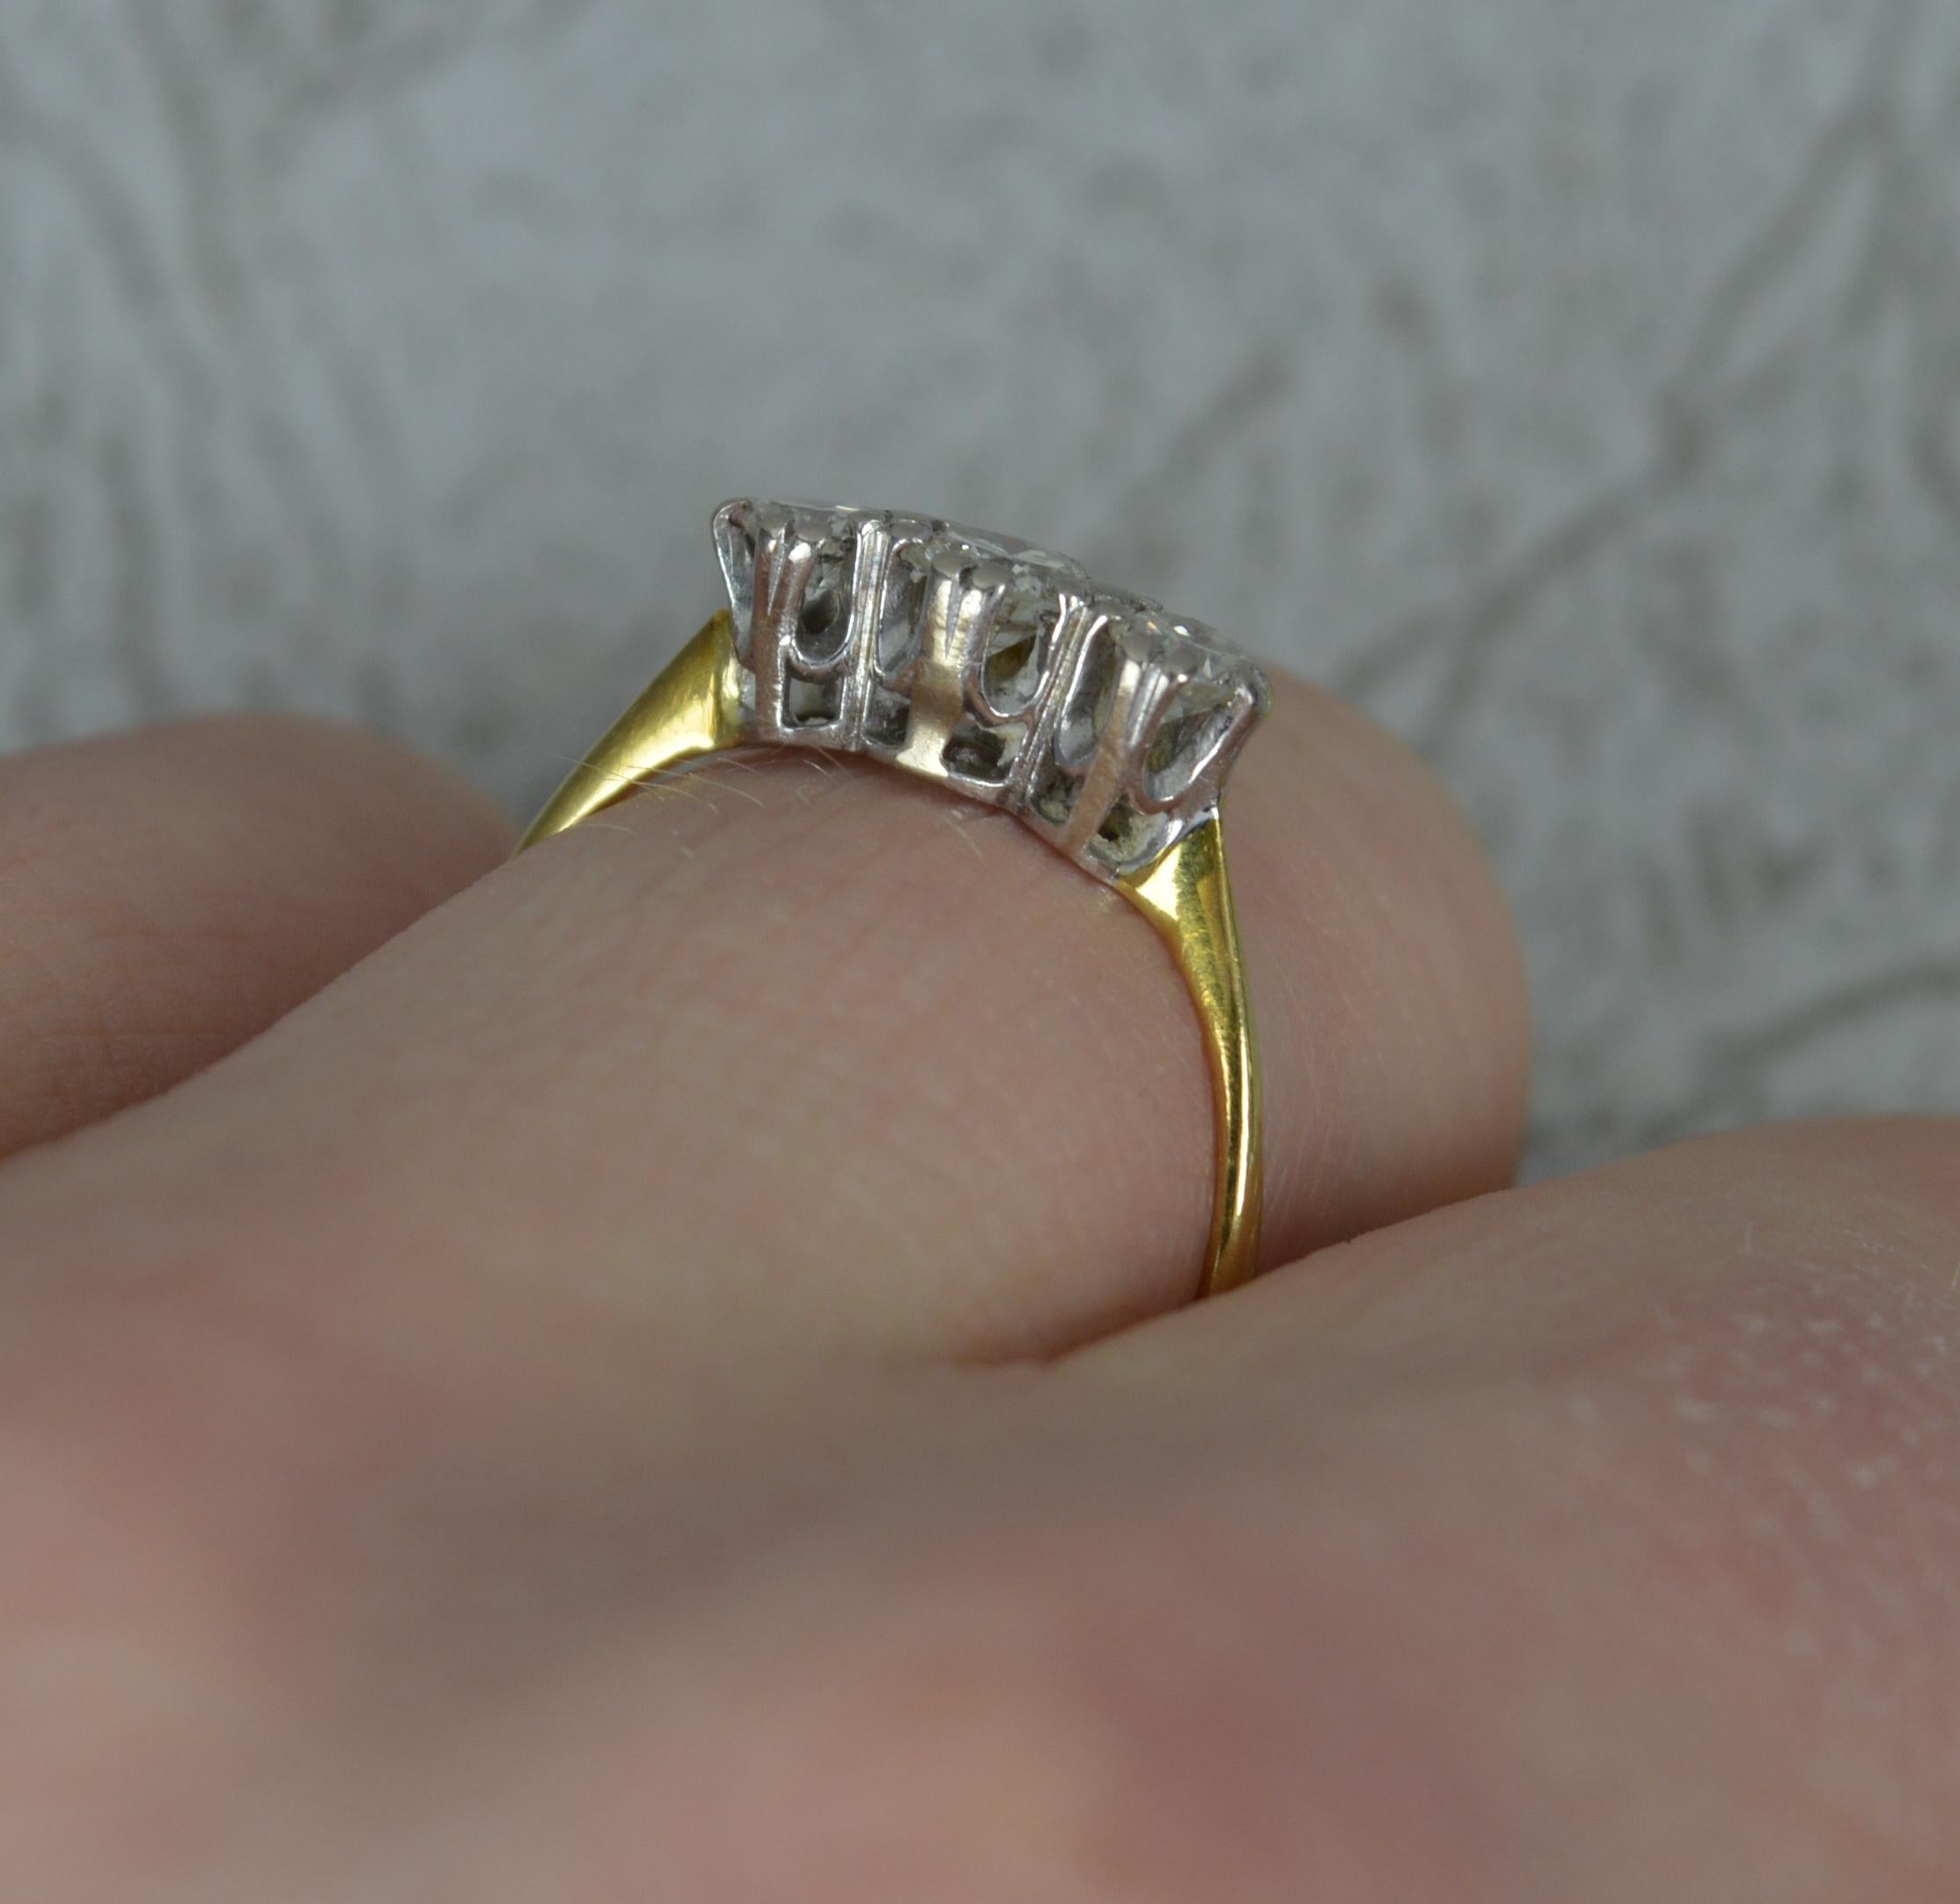 A fine natural diamond trilogy ring.
Solid 18 carat yellow gold shank with platinum head setting.
Three natural, round, transitional cut diamonds in double claw settings. 0.50 carats total. Bright and sparkly.
Vintage piece circa 1950.
12mm x 5mm